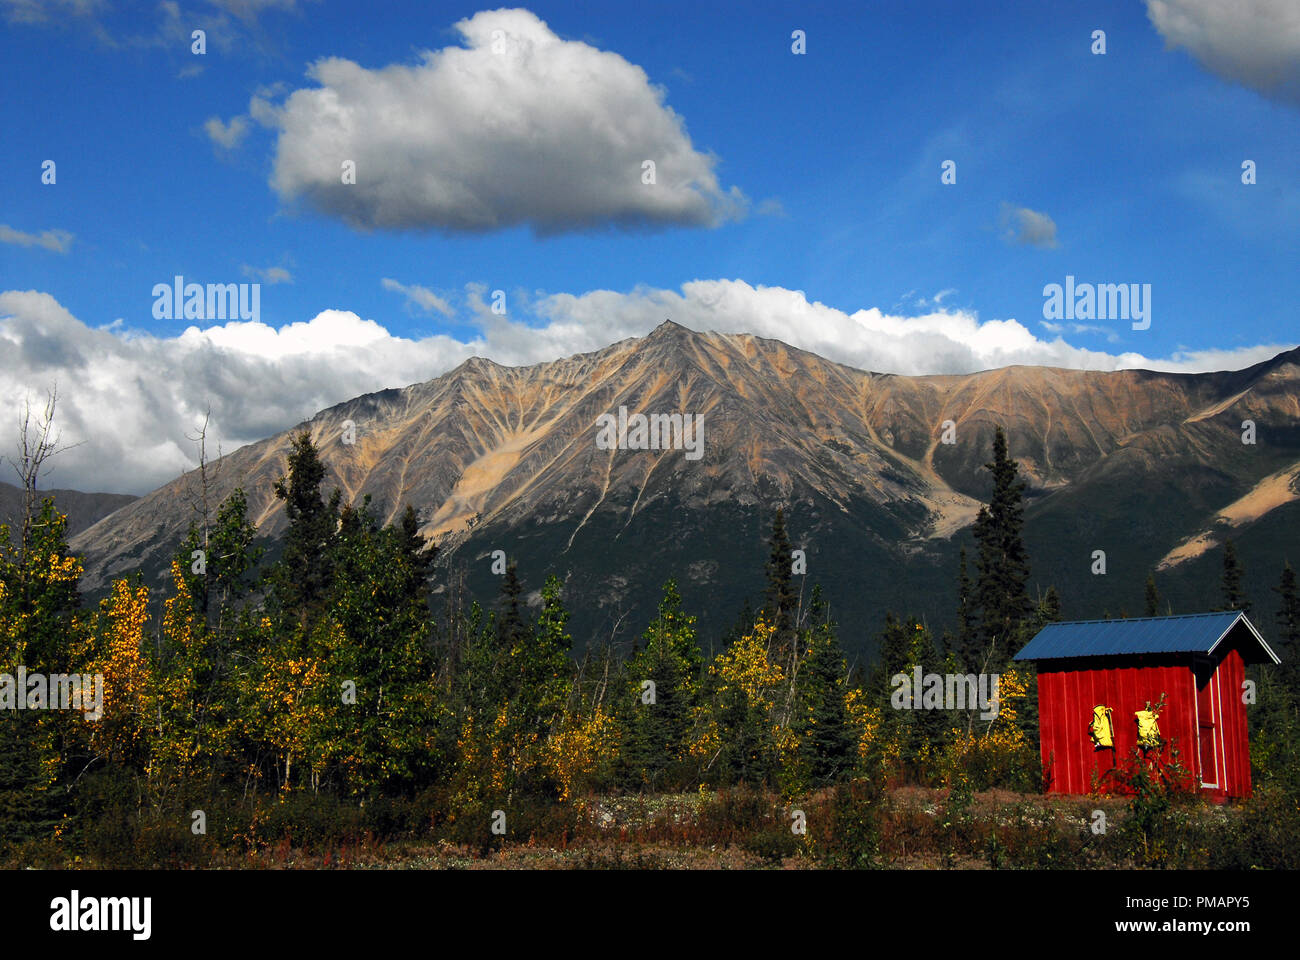 A wonderful panorama of the beautiful landscape along the McCarthy Road- Wrangell National Park in Alaska.  Note the colorful emergency shed. Stock Photo